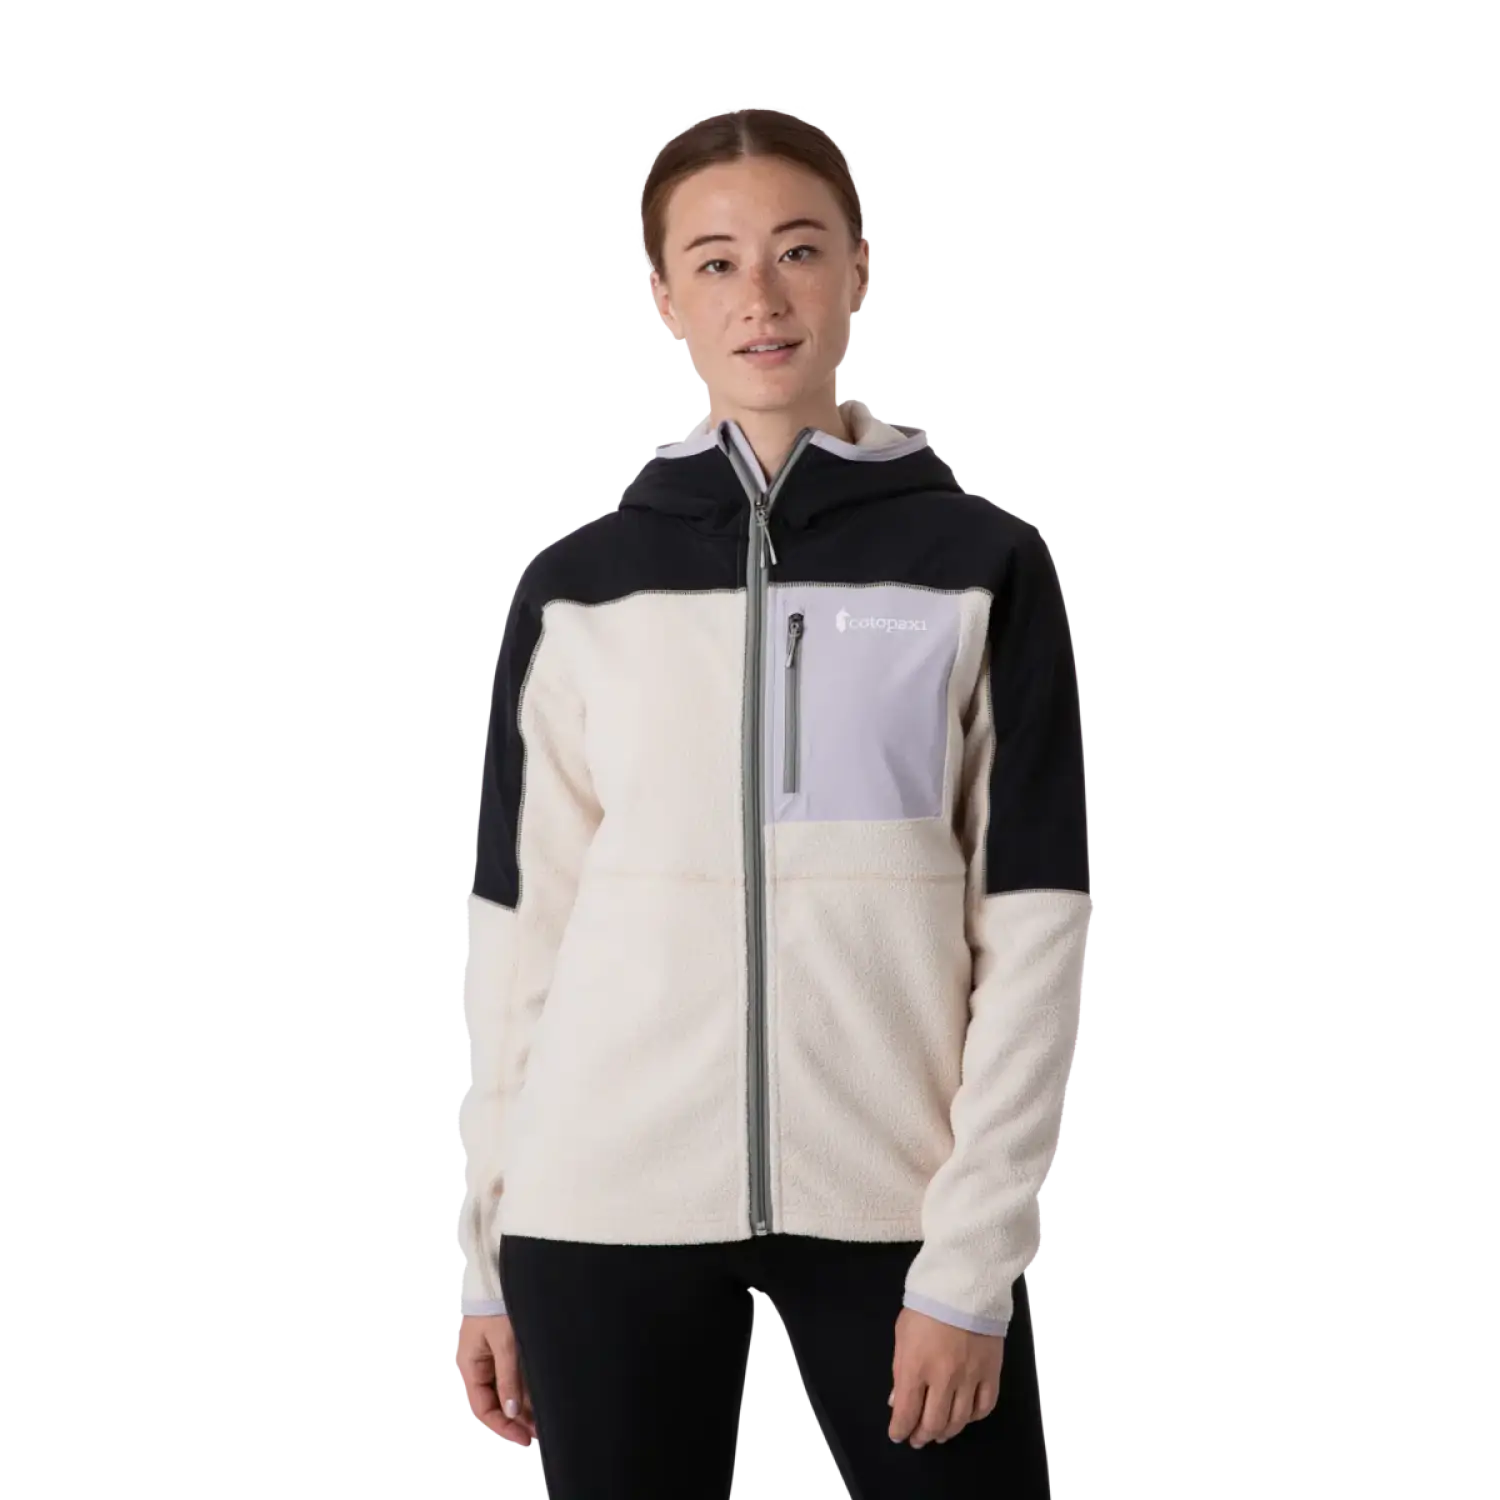 Cotopaxi Women's Abrazo Hooded Full Zip Jacket shown in the Black and Cream color option. Front view, on model.